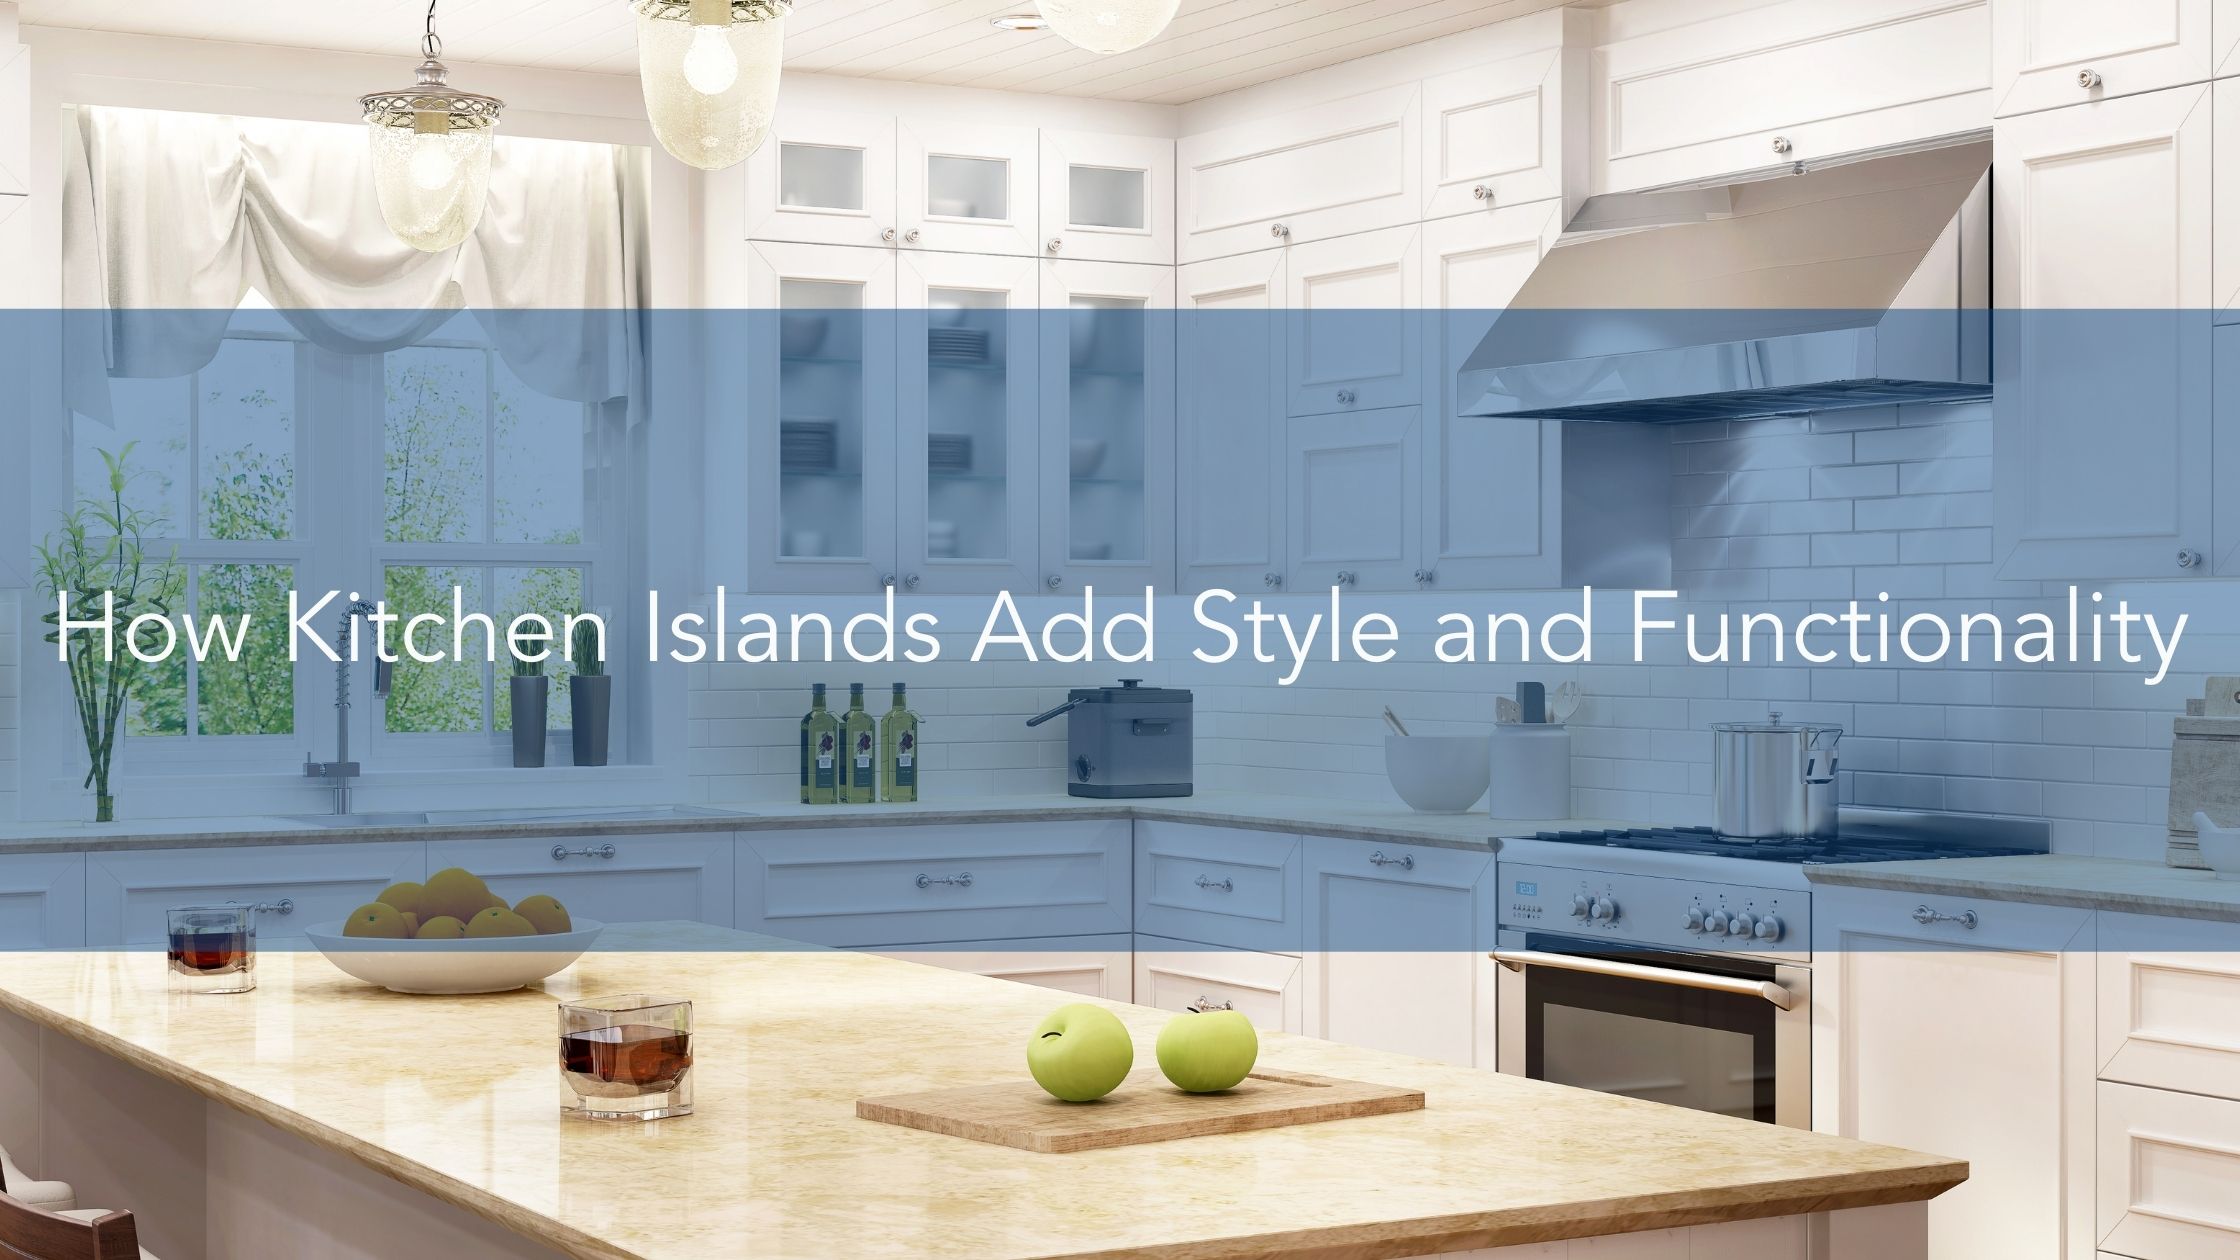 https://雷竞技下载链接官网appwww.explorizers.com/wp-content/uploads/2022/05/How-Kitchen-Islands-Add-Style-and-Functionality.jpg